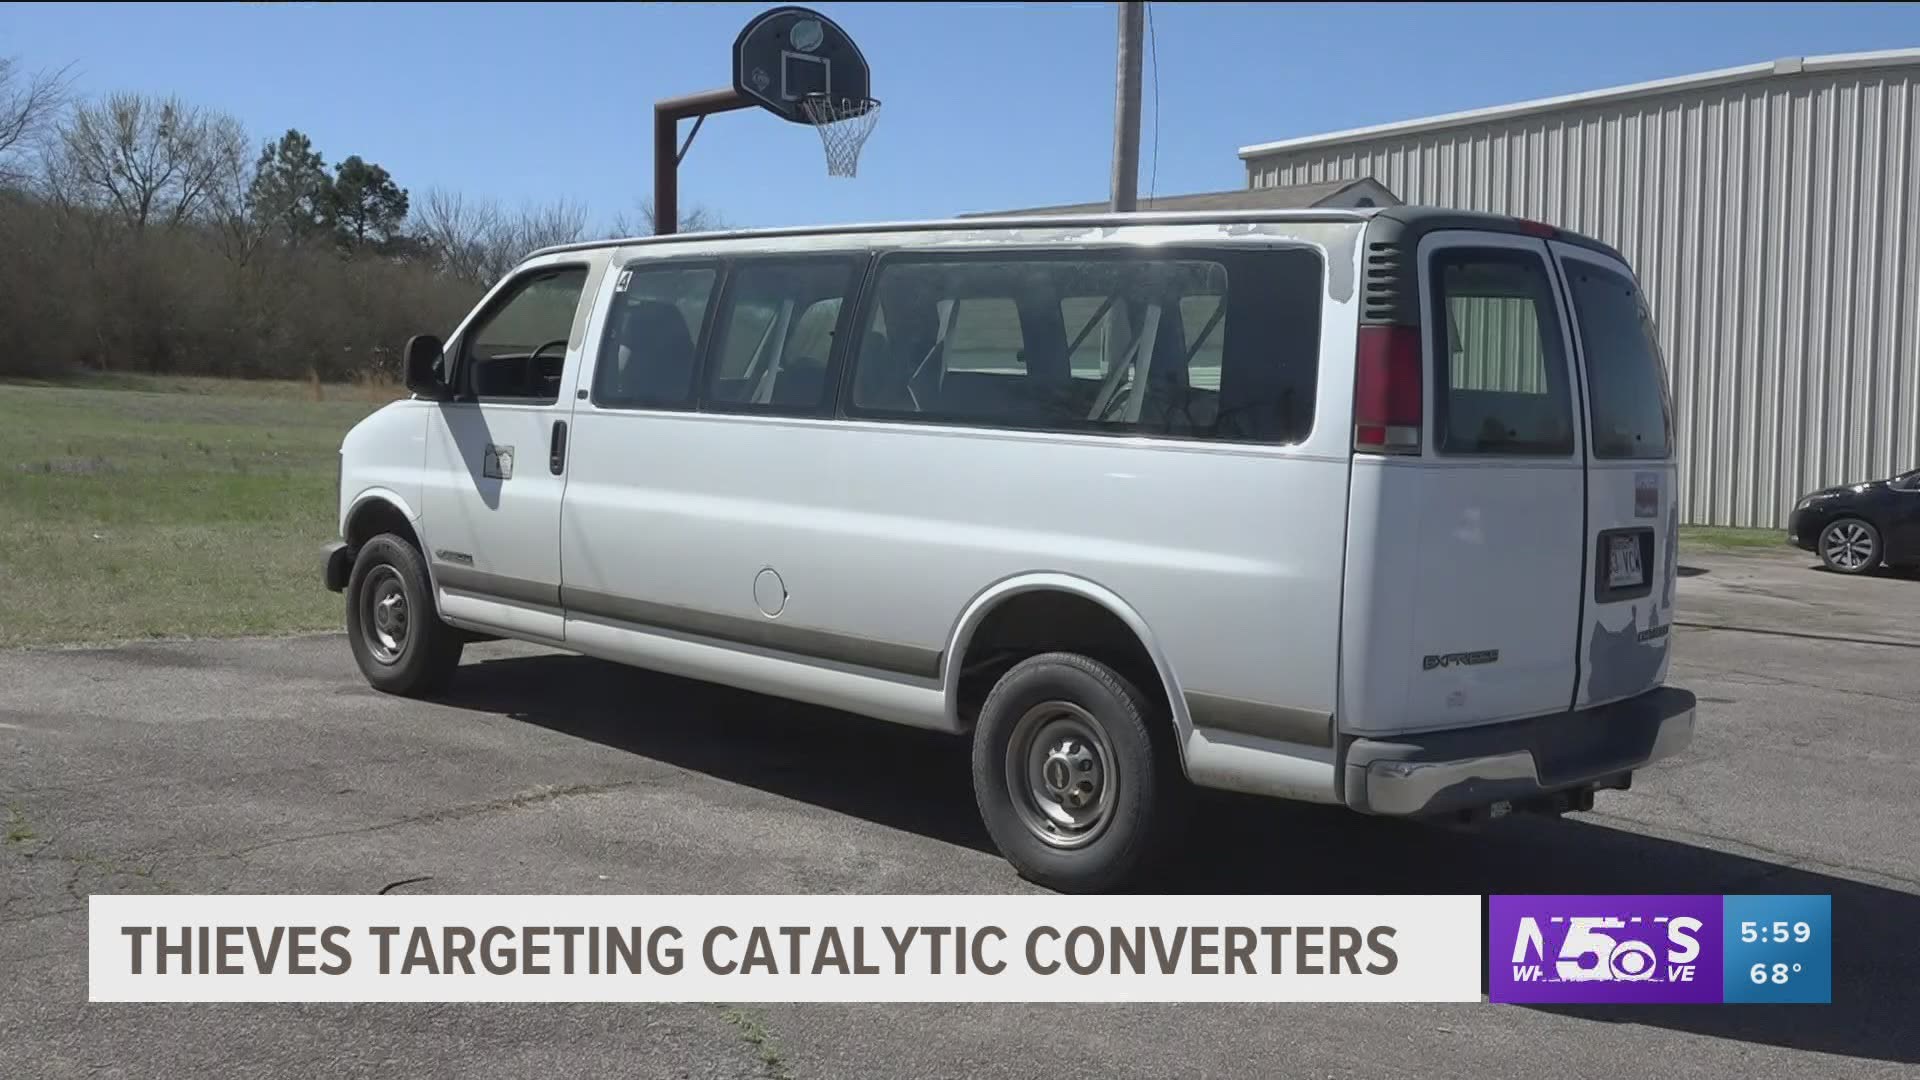 Thieves across the county are stealing catalytic converters because they contain palladium, rhodium and platinum, which fetch a good resale value.